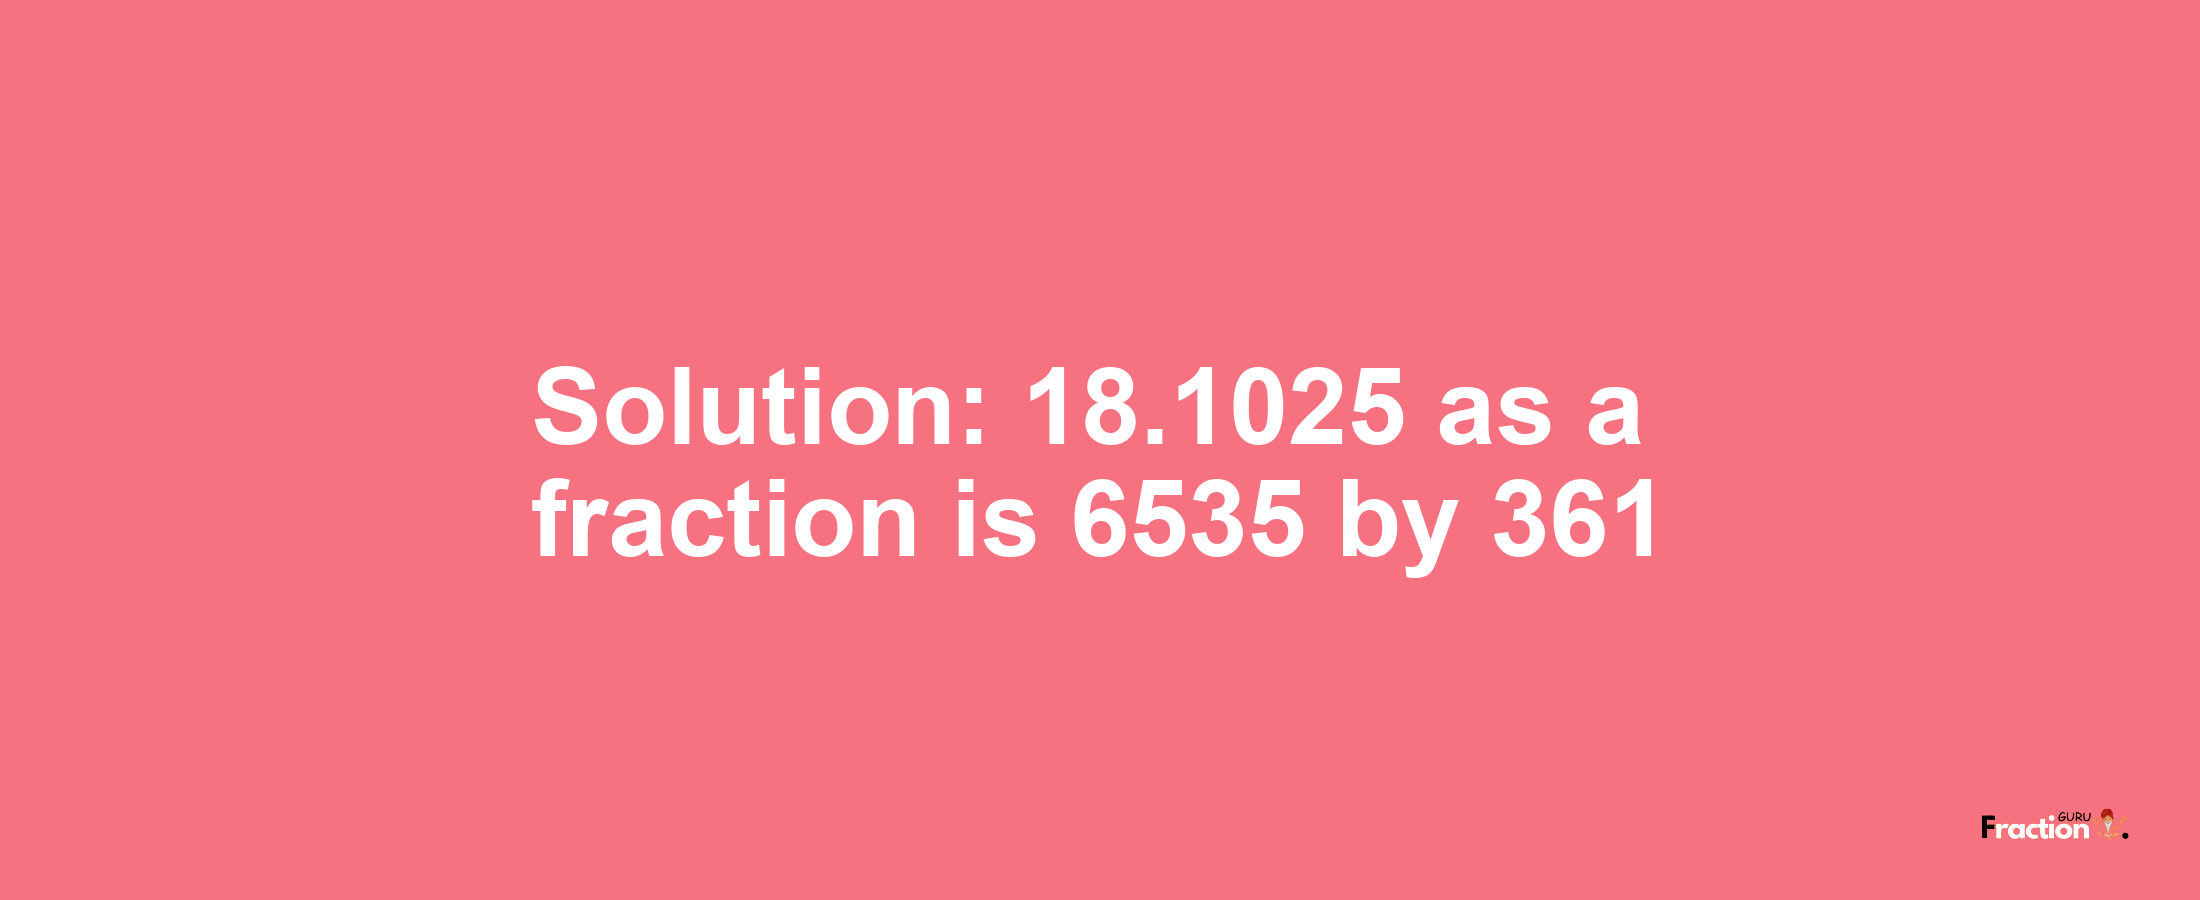 Solution:18.1025 as a fraction is 6535/361